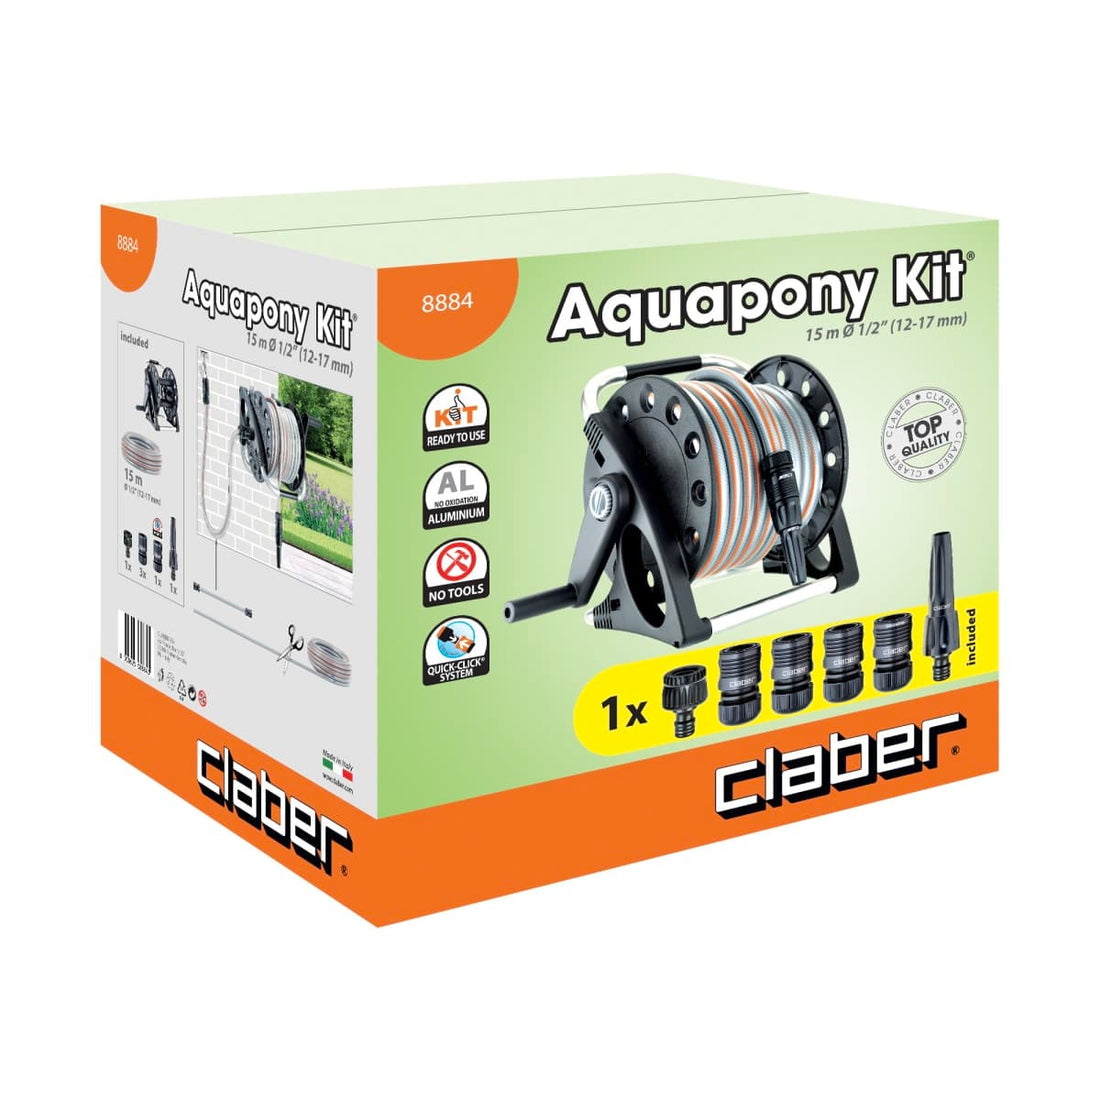 HOSE REEL EQUIPPED AQUAPONY KIT 15MT 12.5 MM CLABER HOSE - best price from Maltashopper.com BR500412013